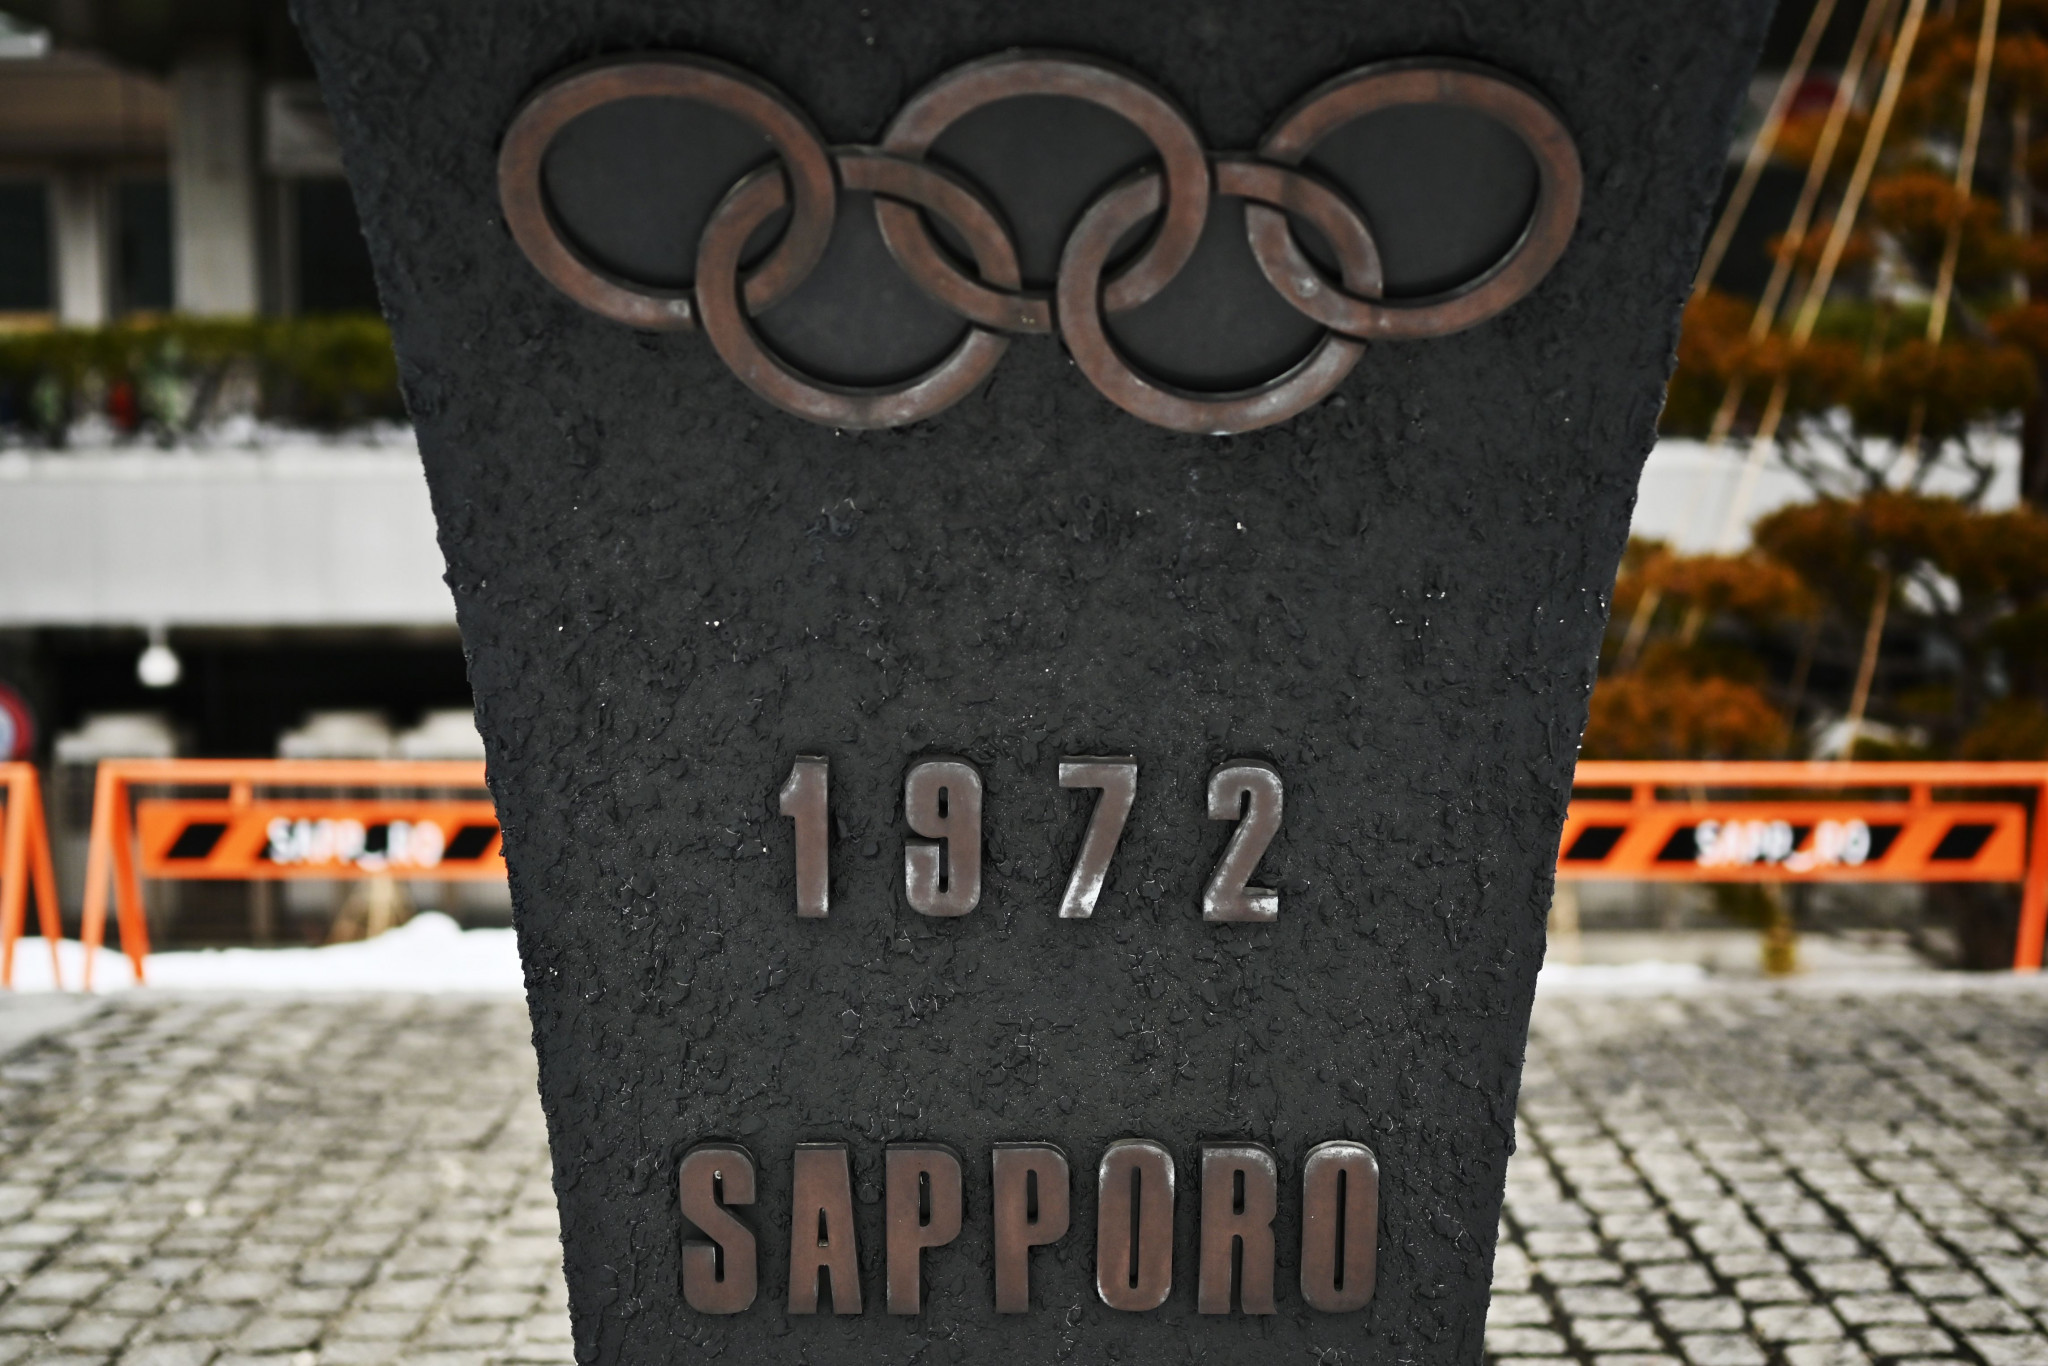 Sapporo last hosted a Winter Olympics in 1972 ©Getty Images